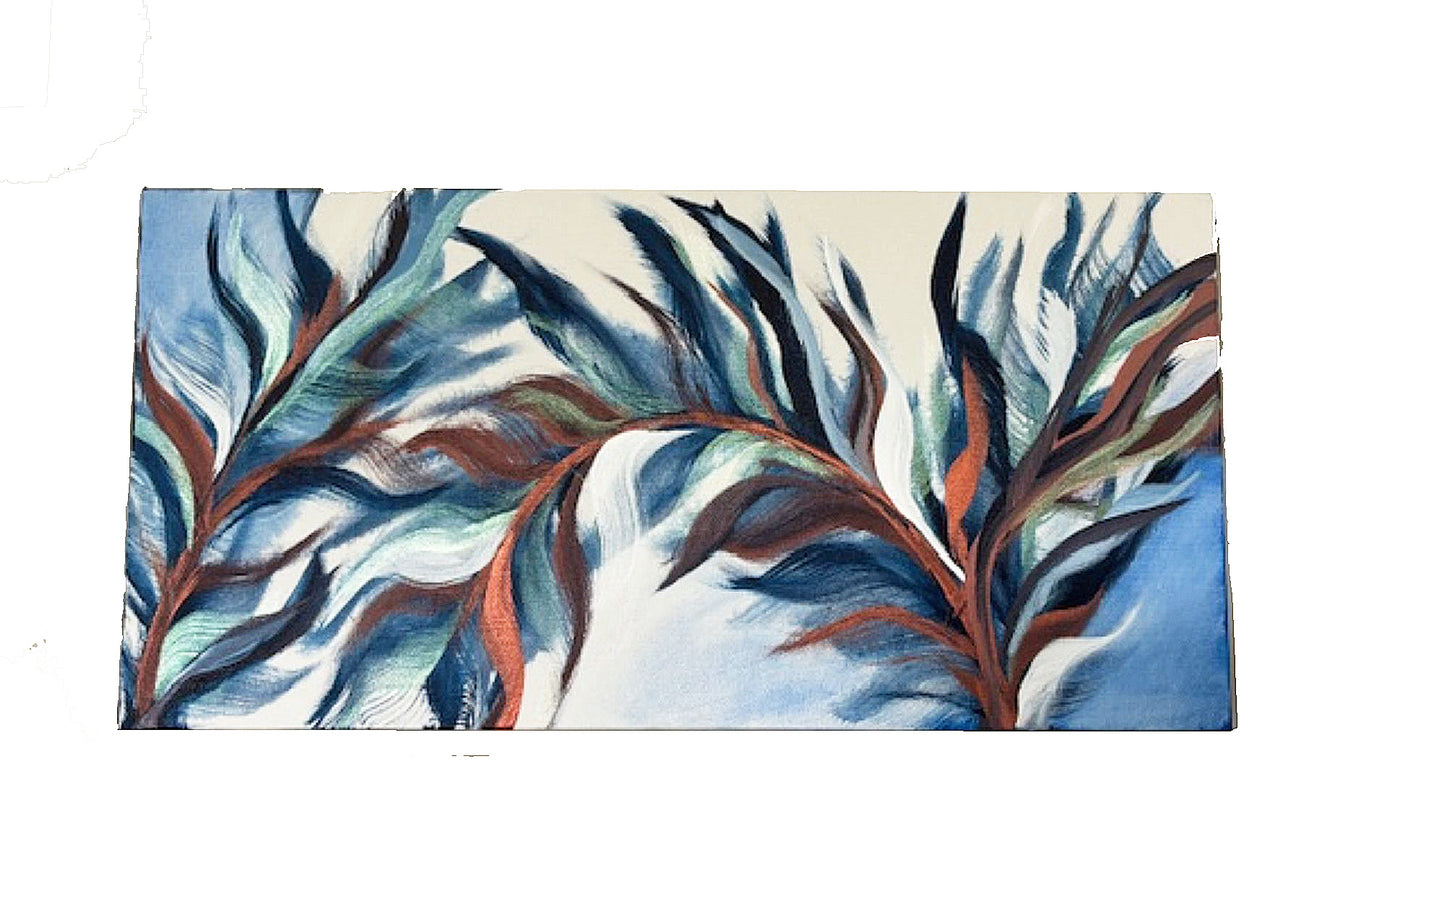 <p>These fronds are dancing in the breeze.&nbsp; Colors of blue, bronze, iridescent green and white flow over the canvas.&nbsp; The iridescent color changes with different angles.&nbsp;&nbsp;</p> <p>How do you like it?&nbsp; Vertical or Horizontal?&nbsp; Either way is beautiful!</p> <p>Painted with acrylic paint on a stretched canvas.&nbsp; Easy to hang.</p> <p>20 x 10</p>